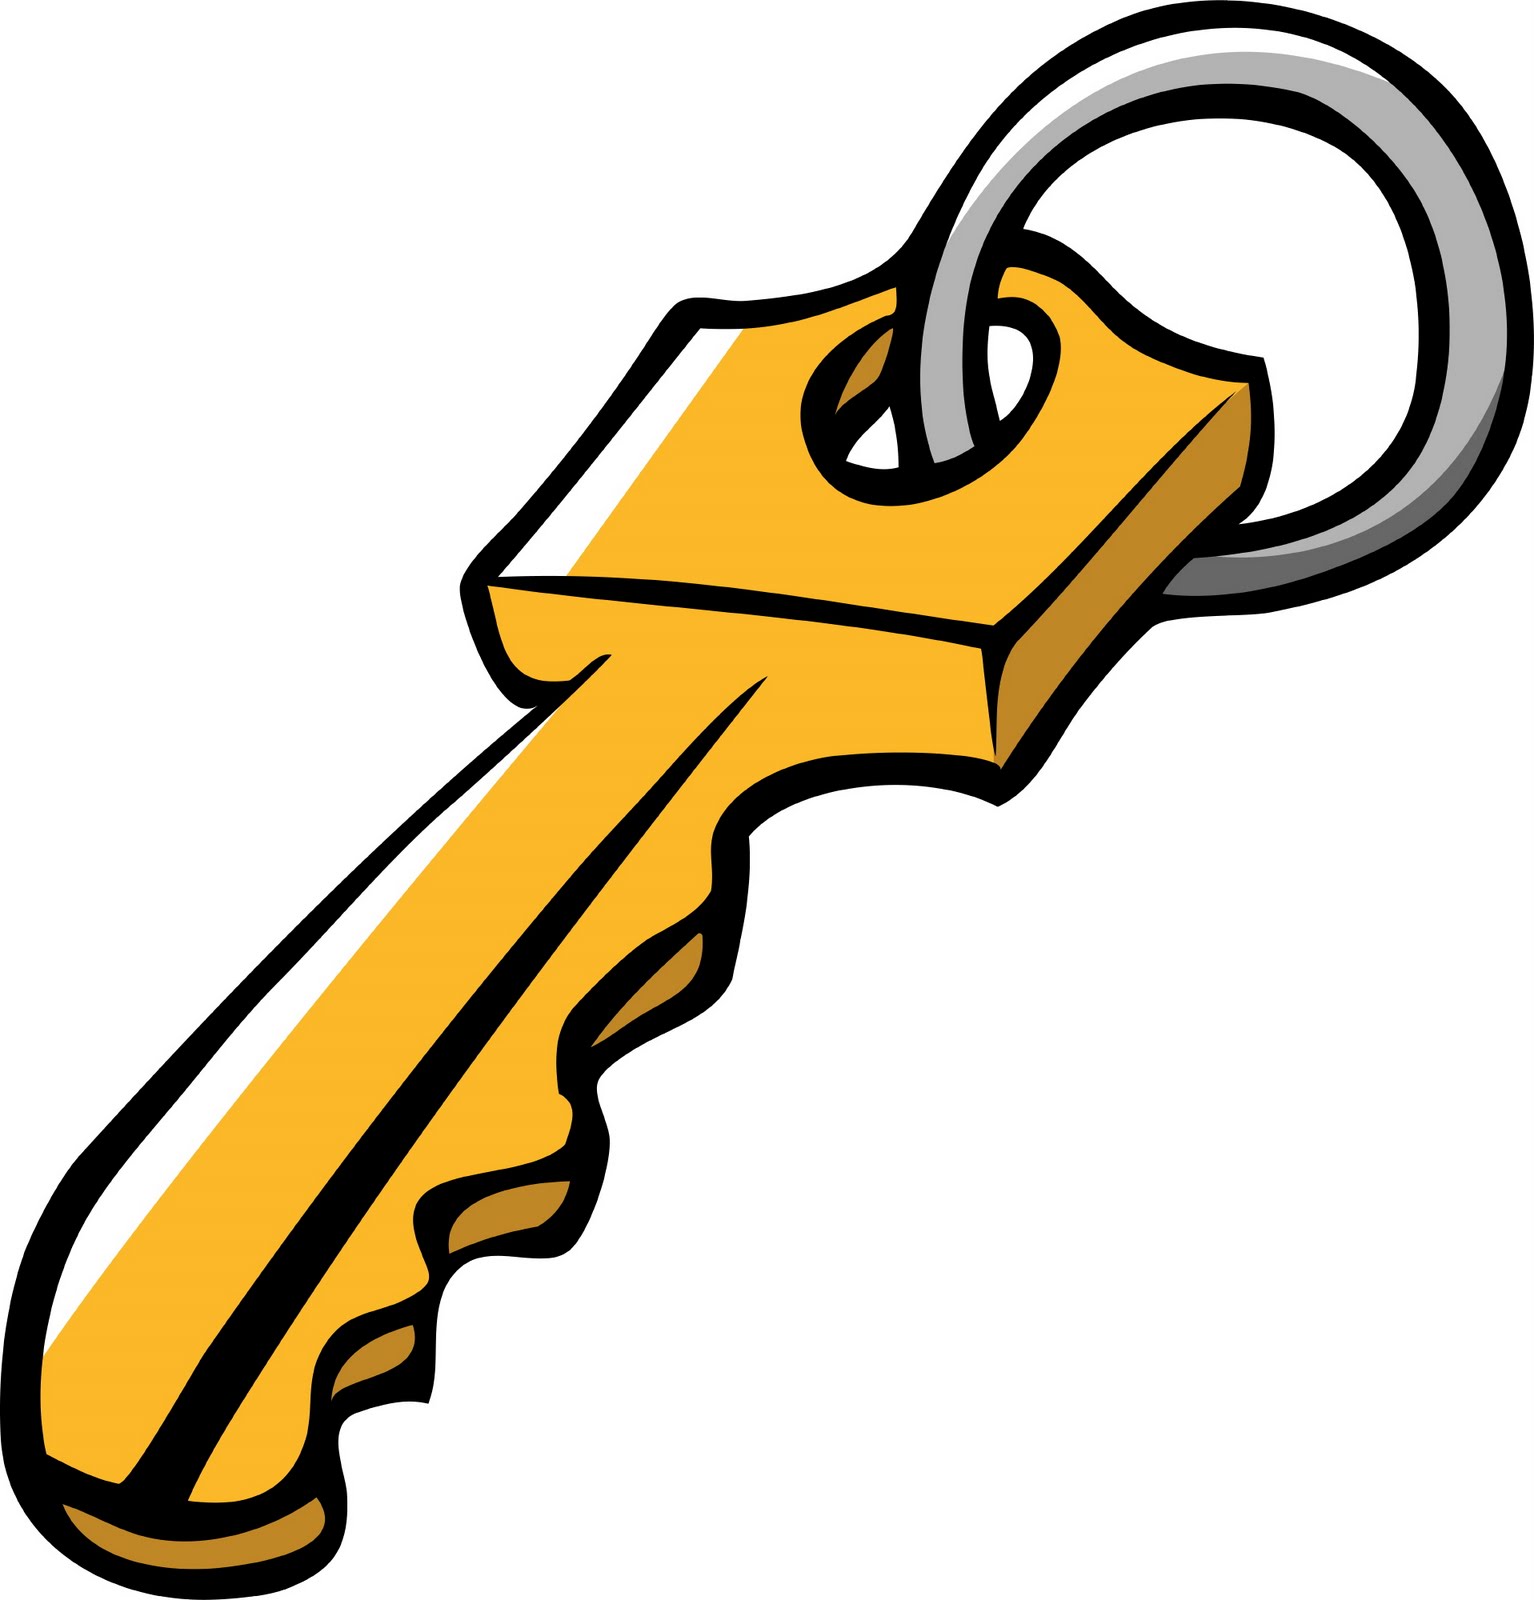 Key Clip Art Free - Free Clipart Images